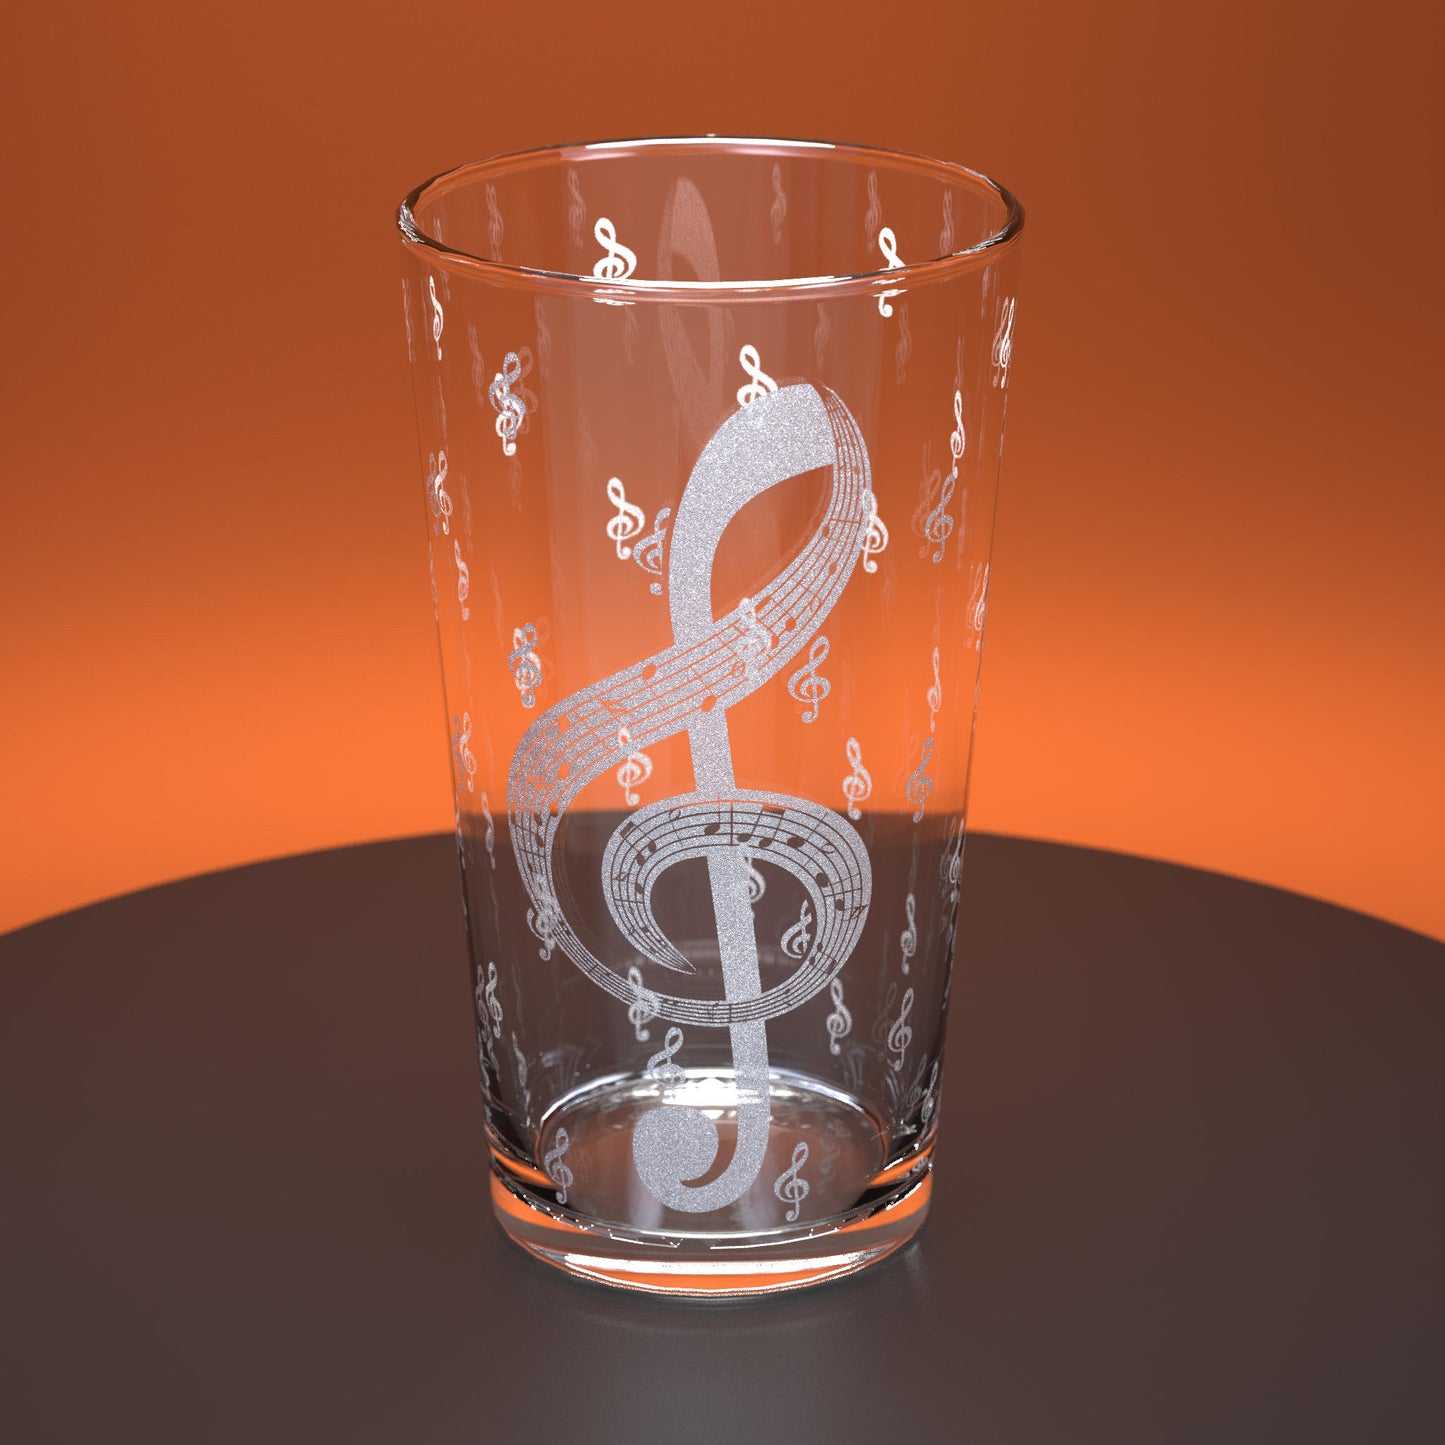 Treble Clef Engraved Pint Glass